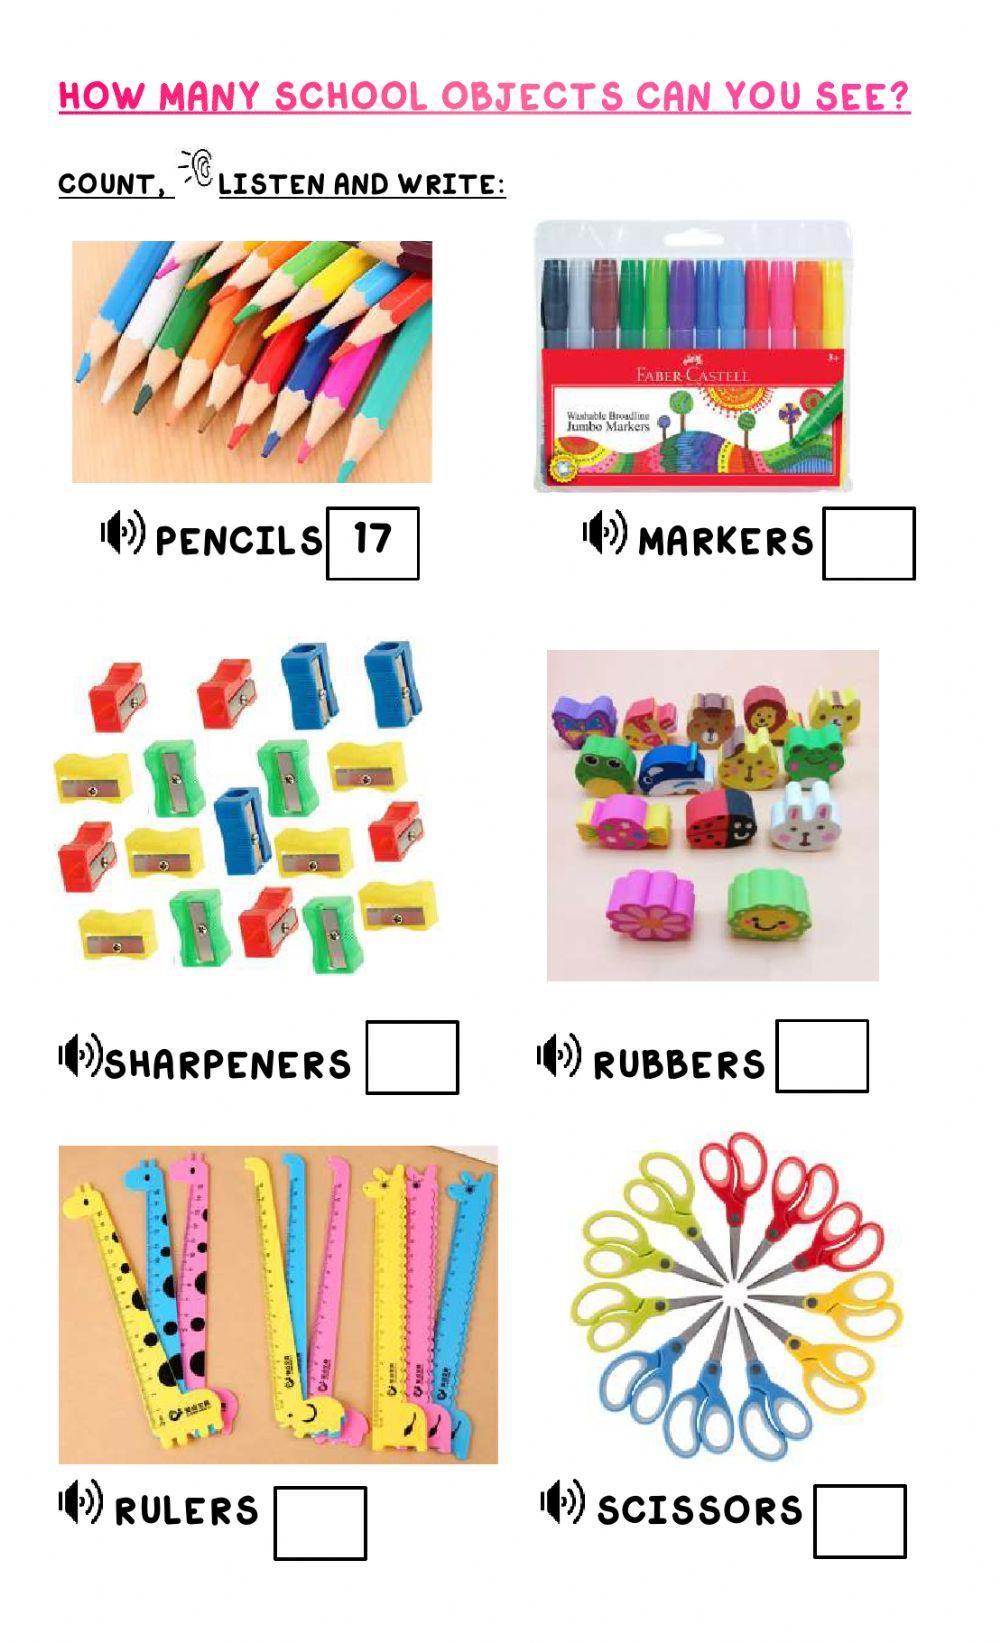 School objects - Count